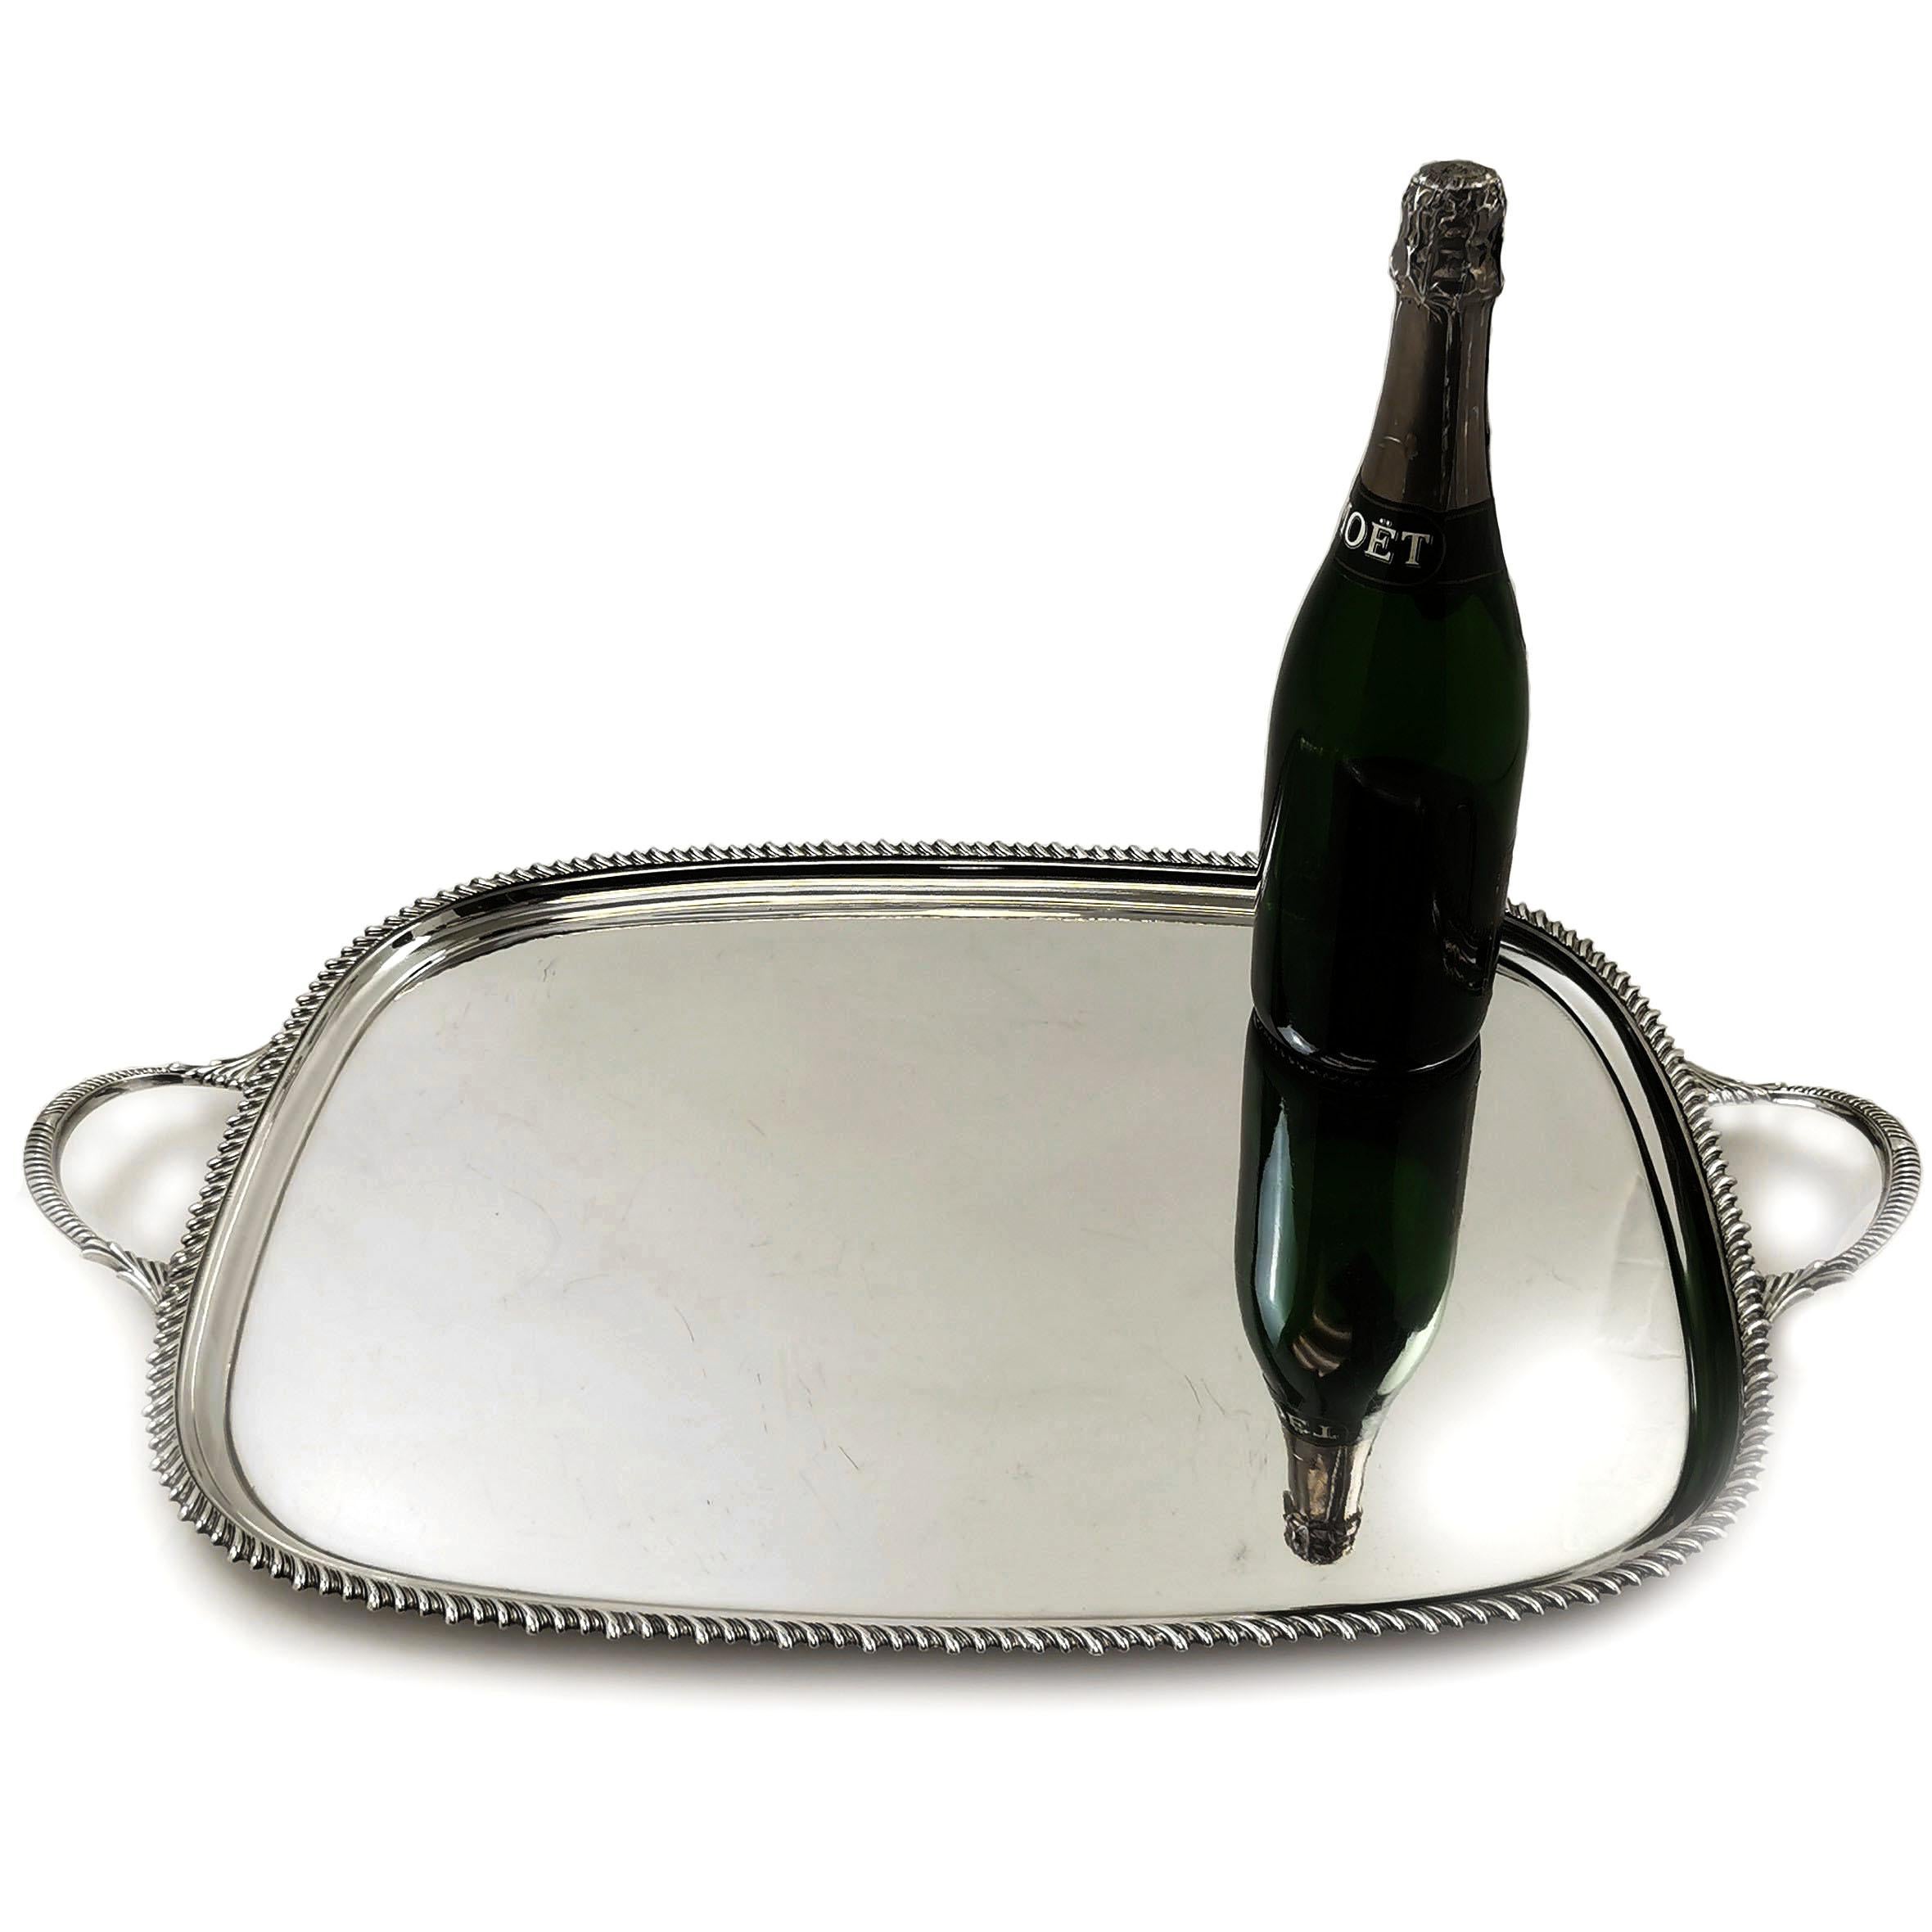 sterling silver serving tray with handles